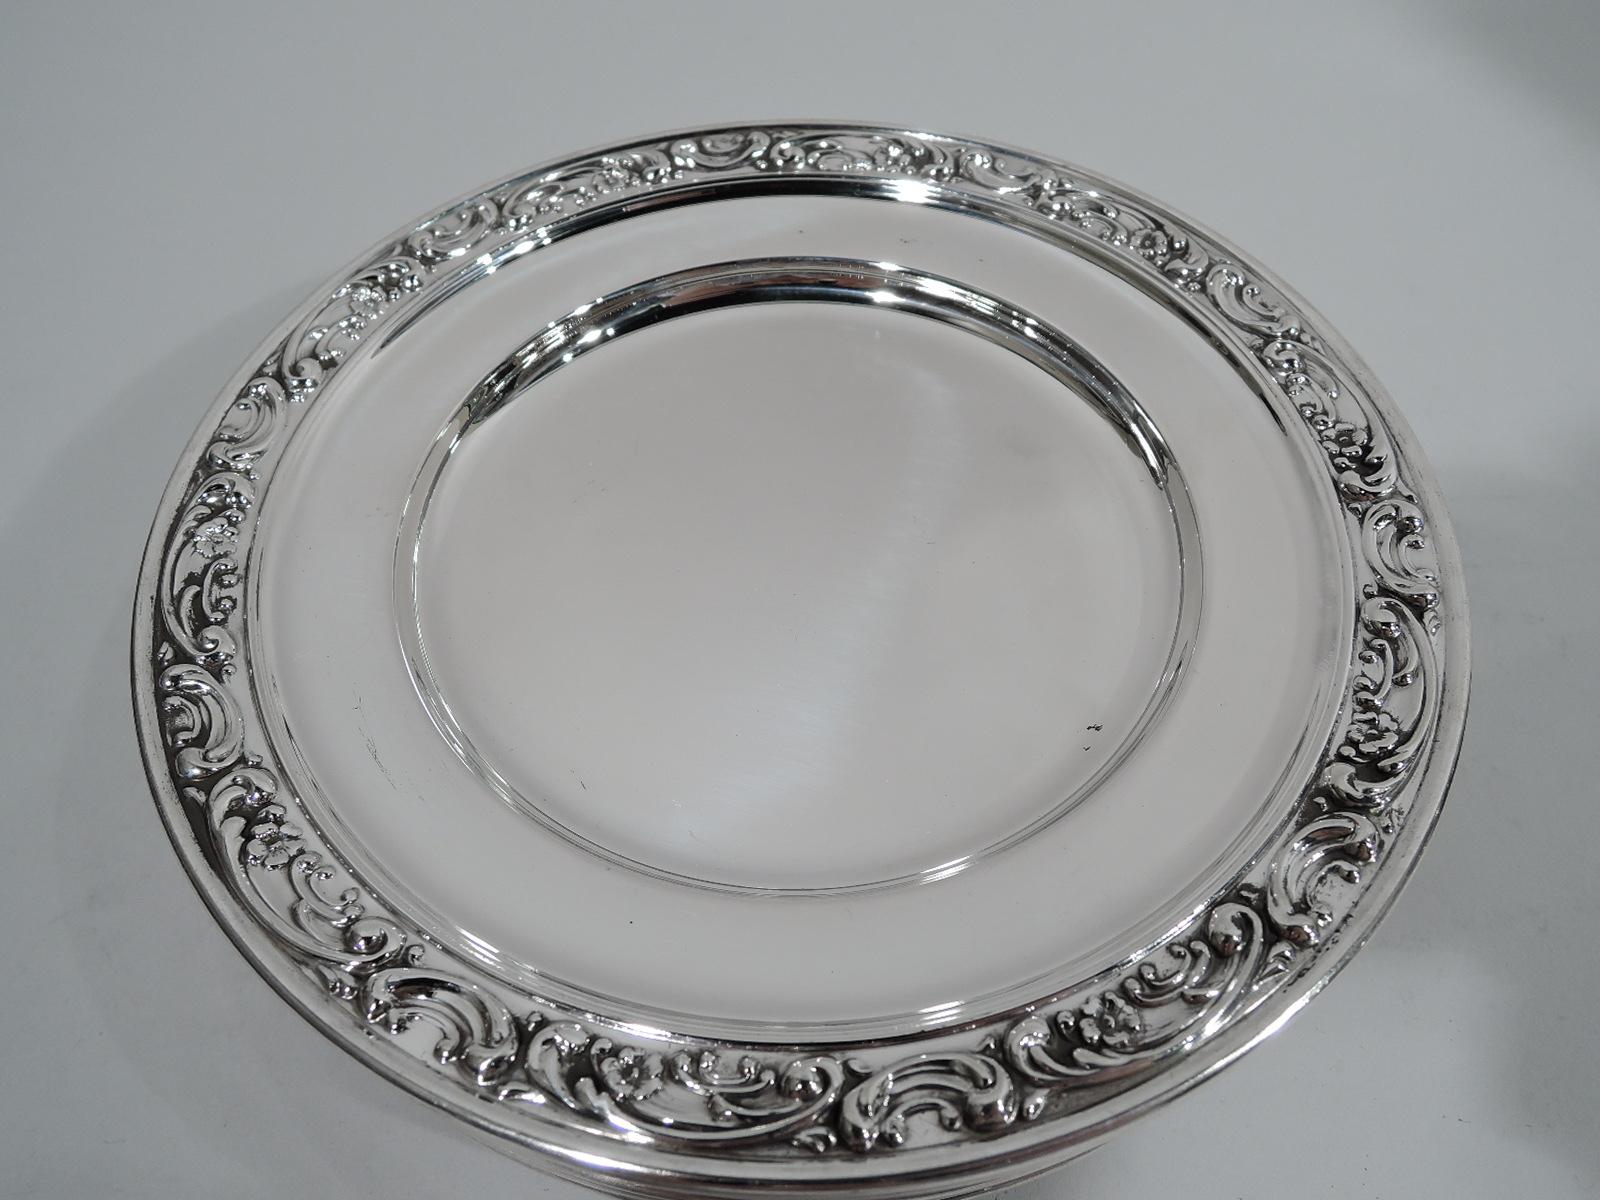 Set of 12 rose scroll sterling silver bread and butter plates. Made by Gorham in Providence. Round well and plain shoulder. Rim has chased scrolls and flower heads between molded borders. Fully marked and numbered 1234. Total weight: 39.5 troy